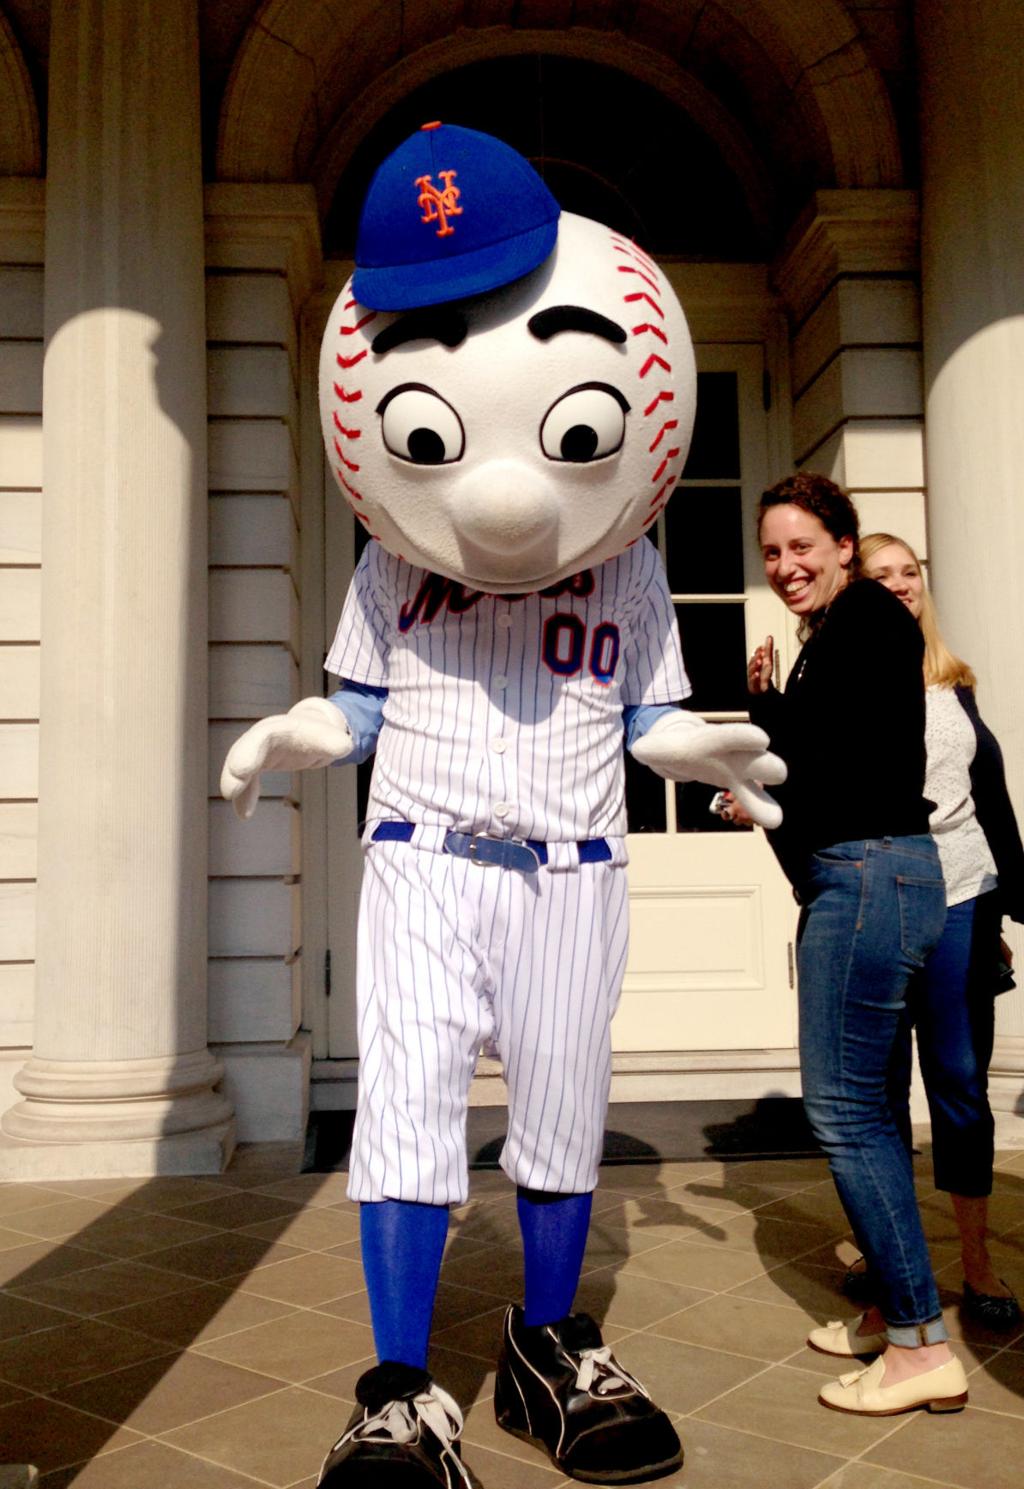 On the Town With Mr. Met, New York's Best Mascot